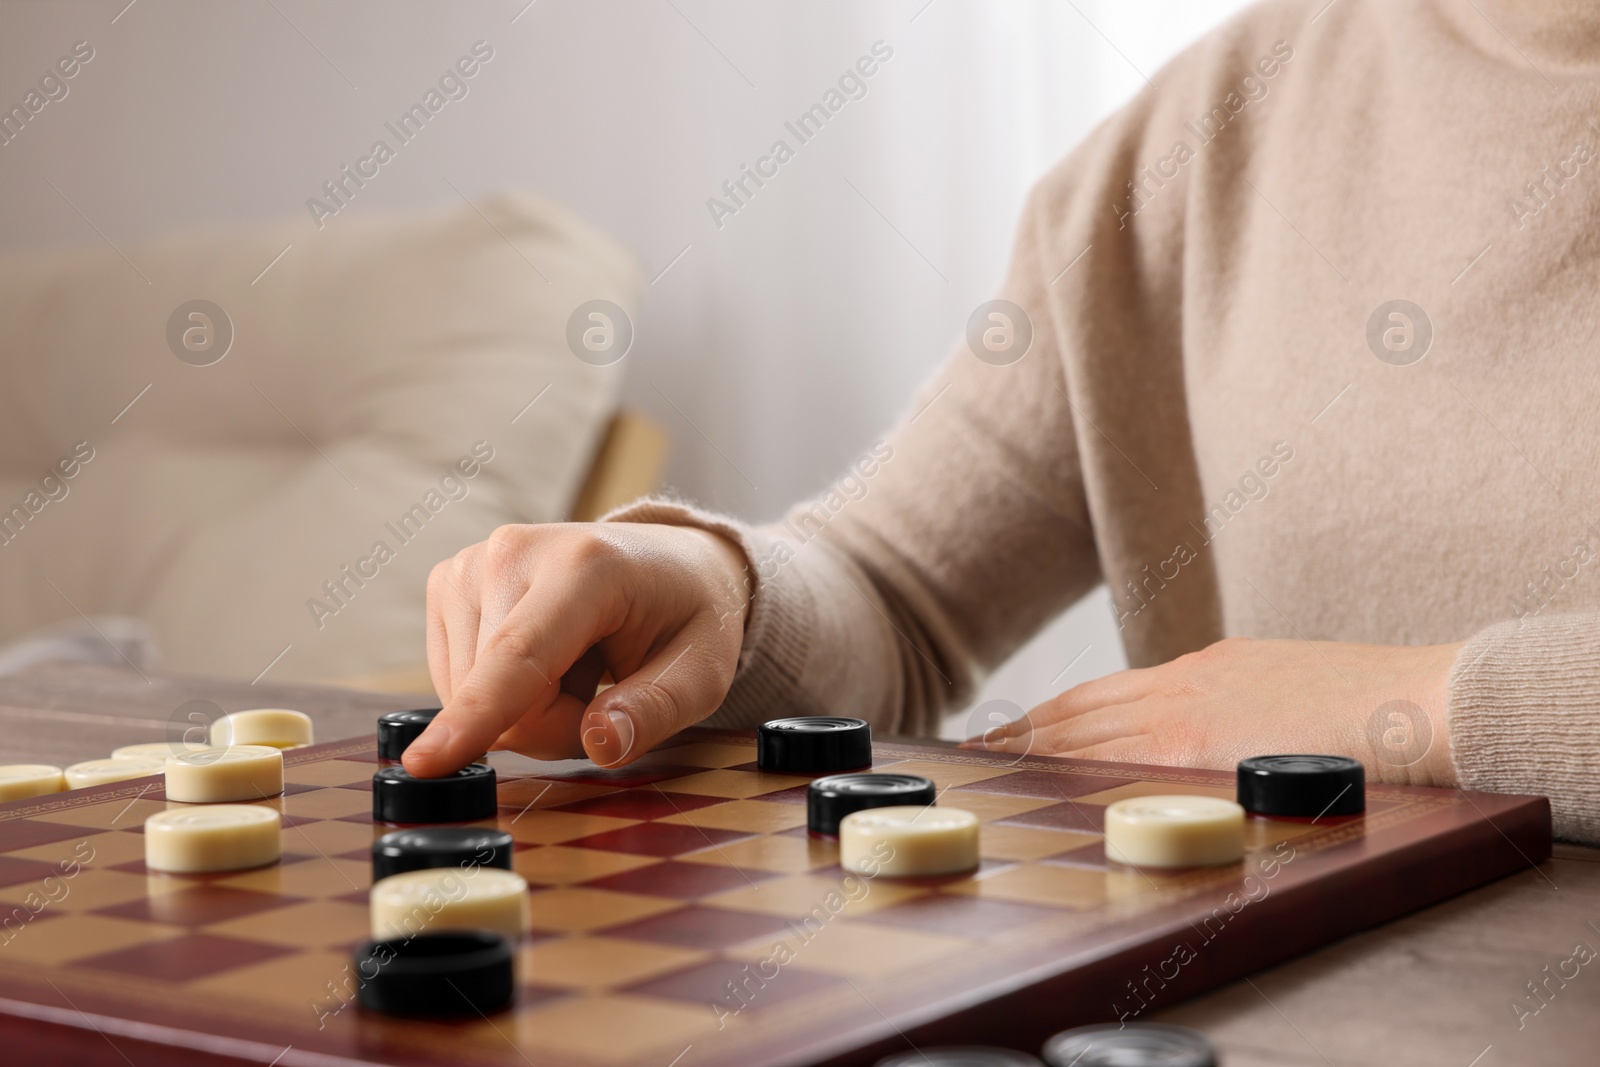 Photo of Playing checkers. Woman thinking about next move at table in room, closeup